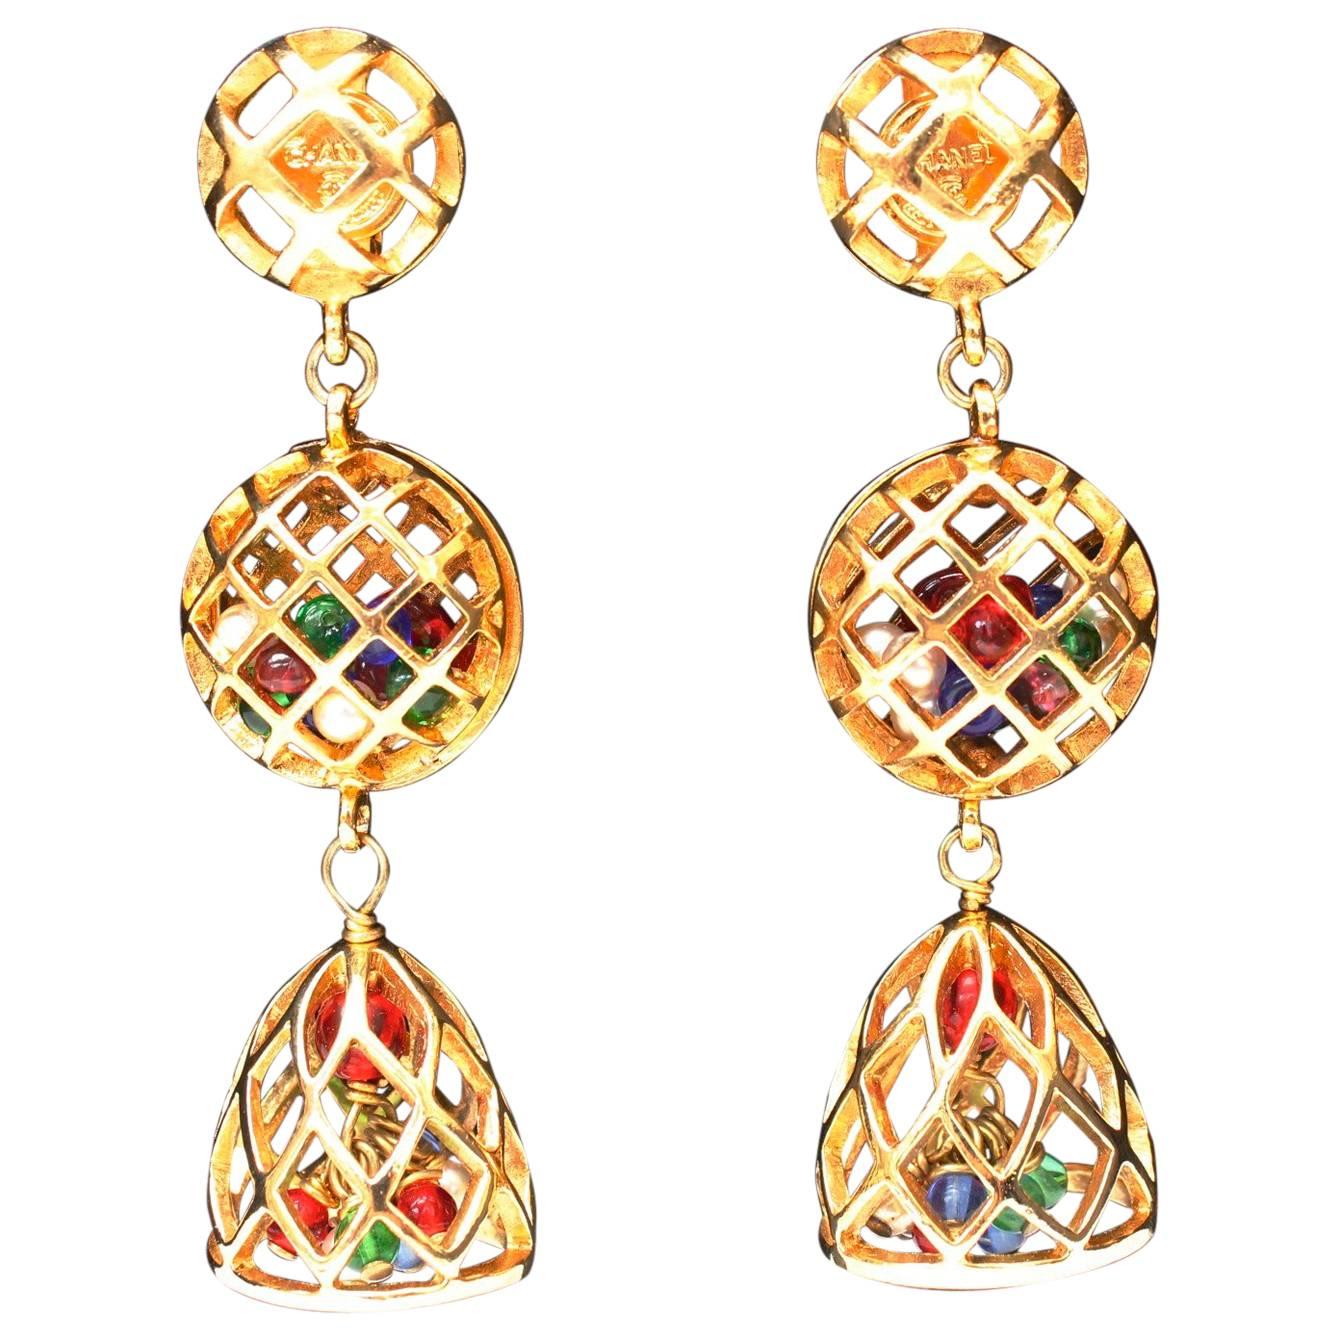 1980s Chanel clip-on earrings representing gilded metal cages